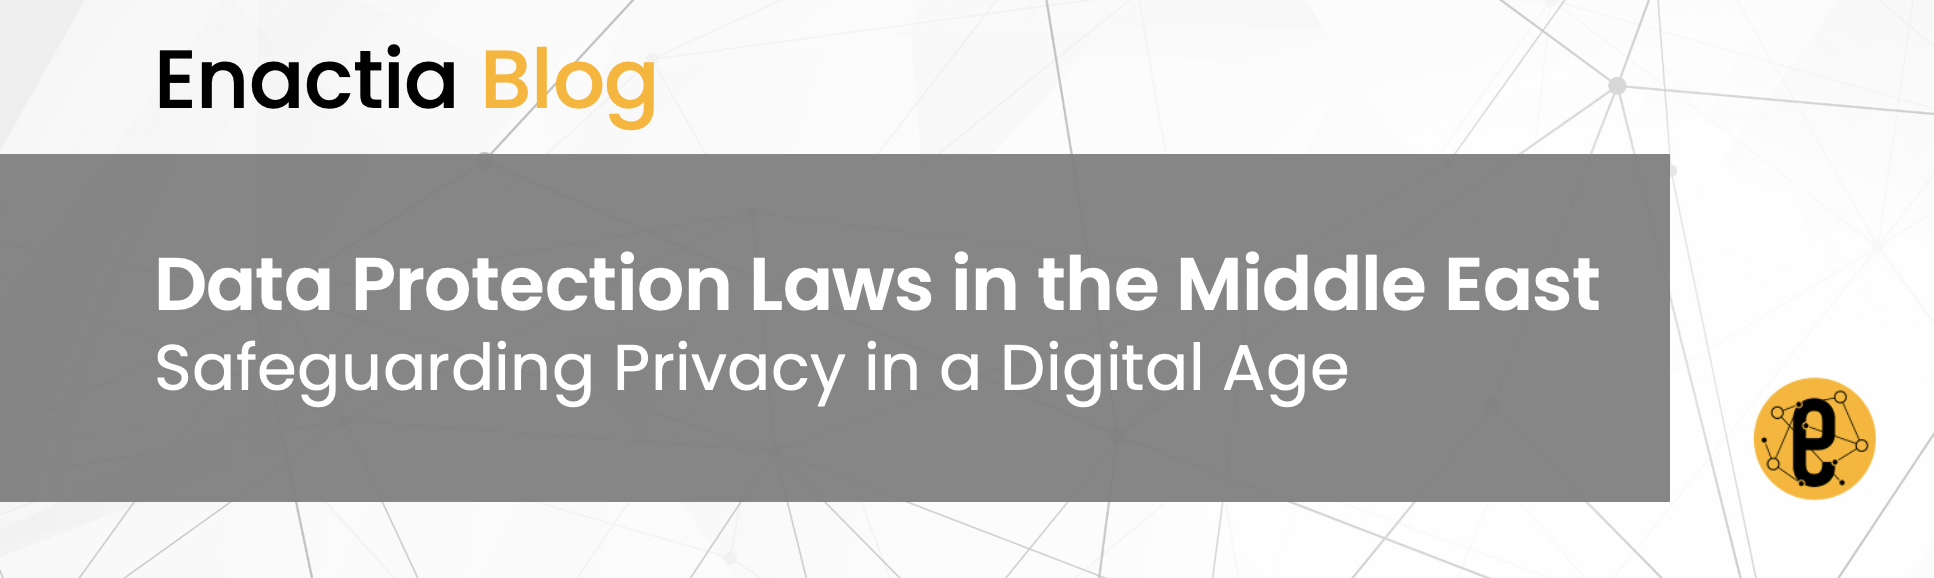 Data Protection Laws in the Middle East: Safeguarding Privacy in a Digital Age